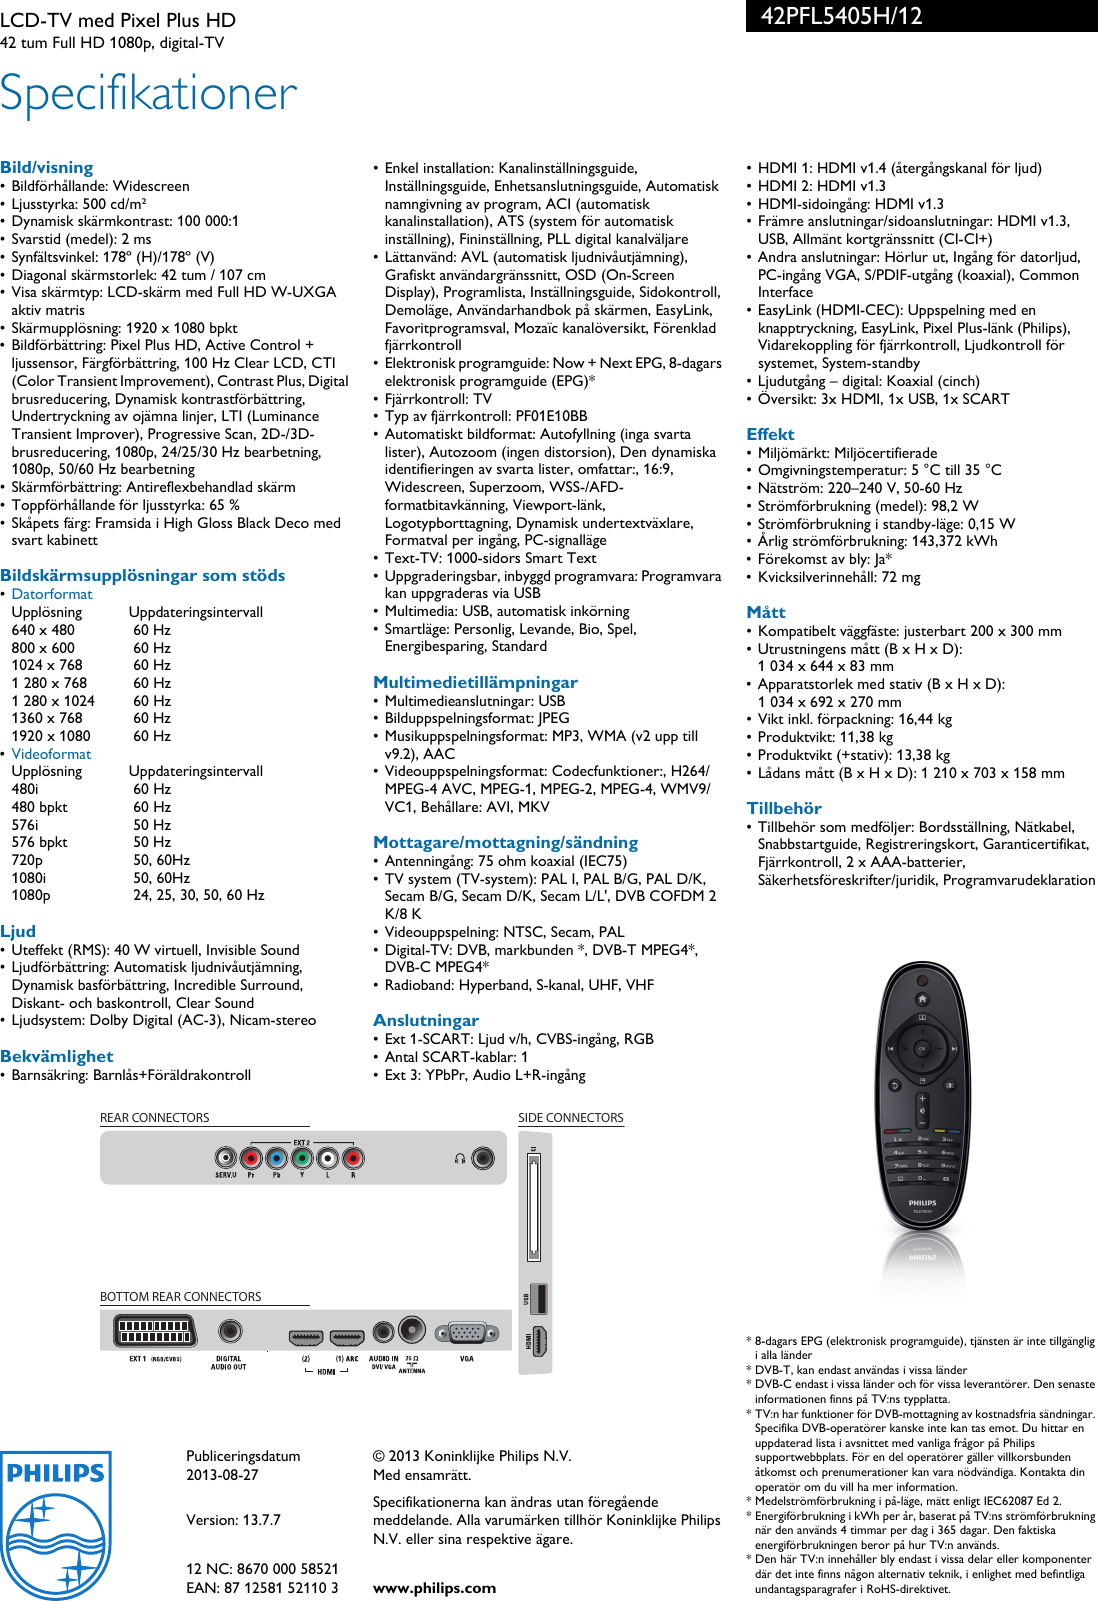 Page 3 of 3 - Philips 42PFL5405H/12 LCD-TV Med Pixel Plus HD User Manual Broschyr 42pfl5405h 12 Pss Swese